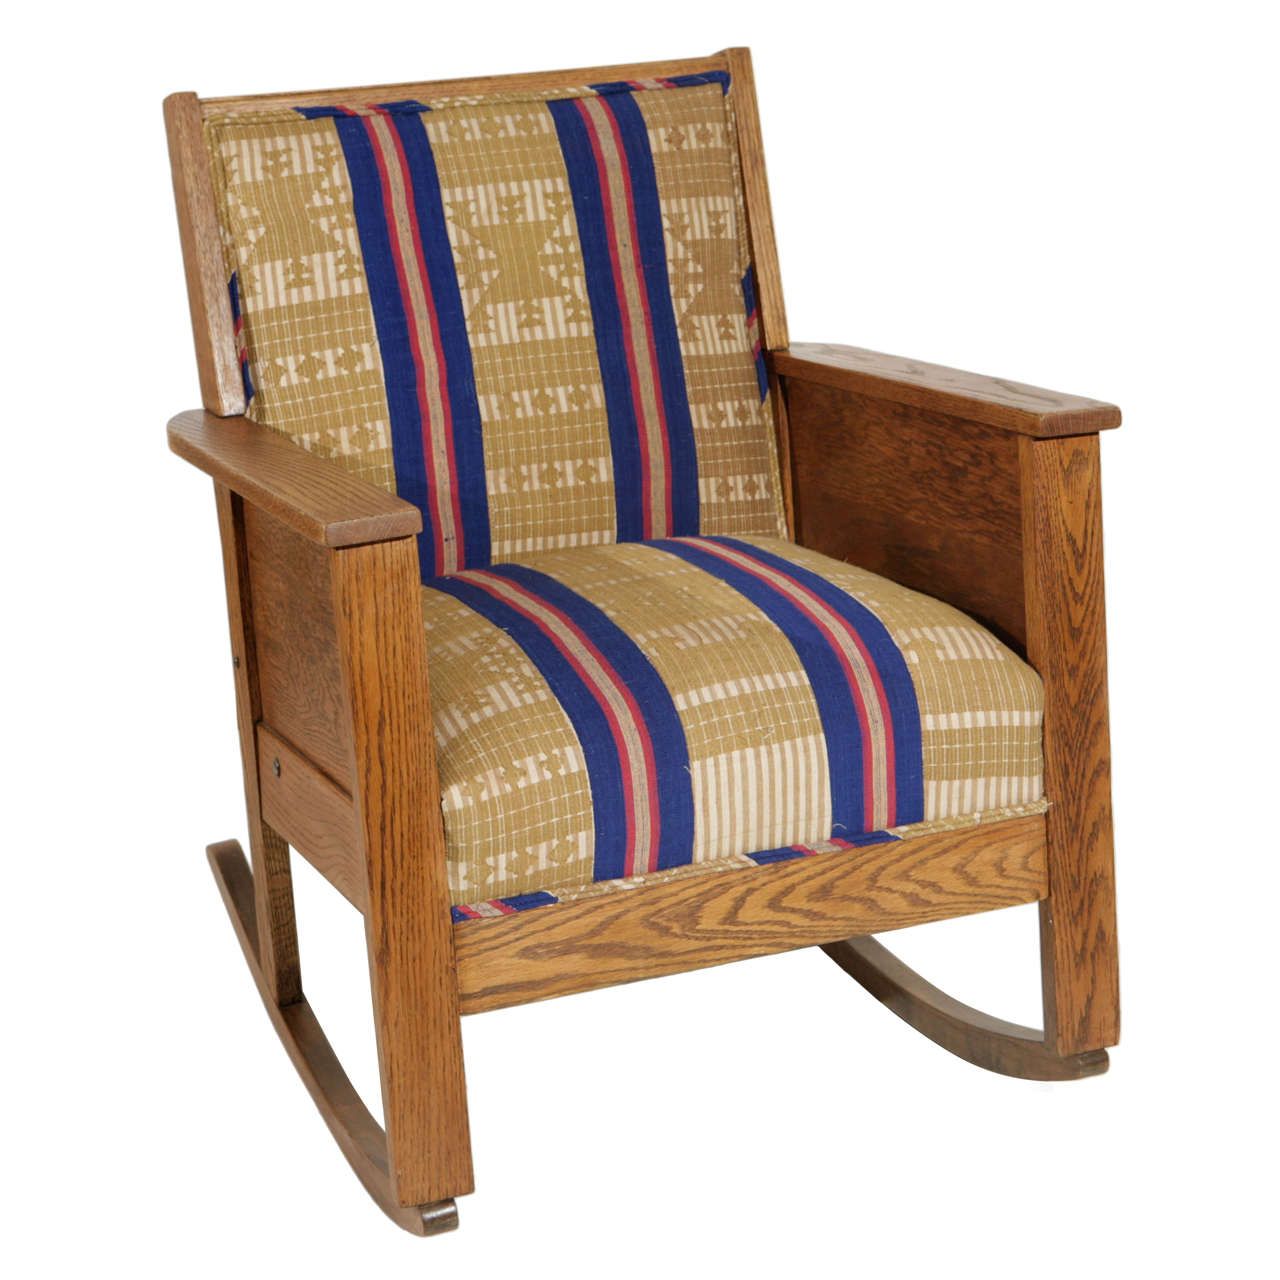 Late 19th Century American Craftsman Mission Style Oak Rocking Chair